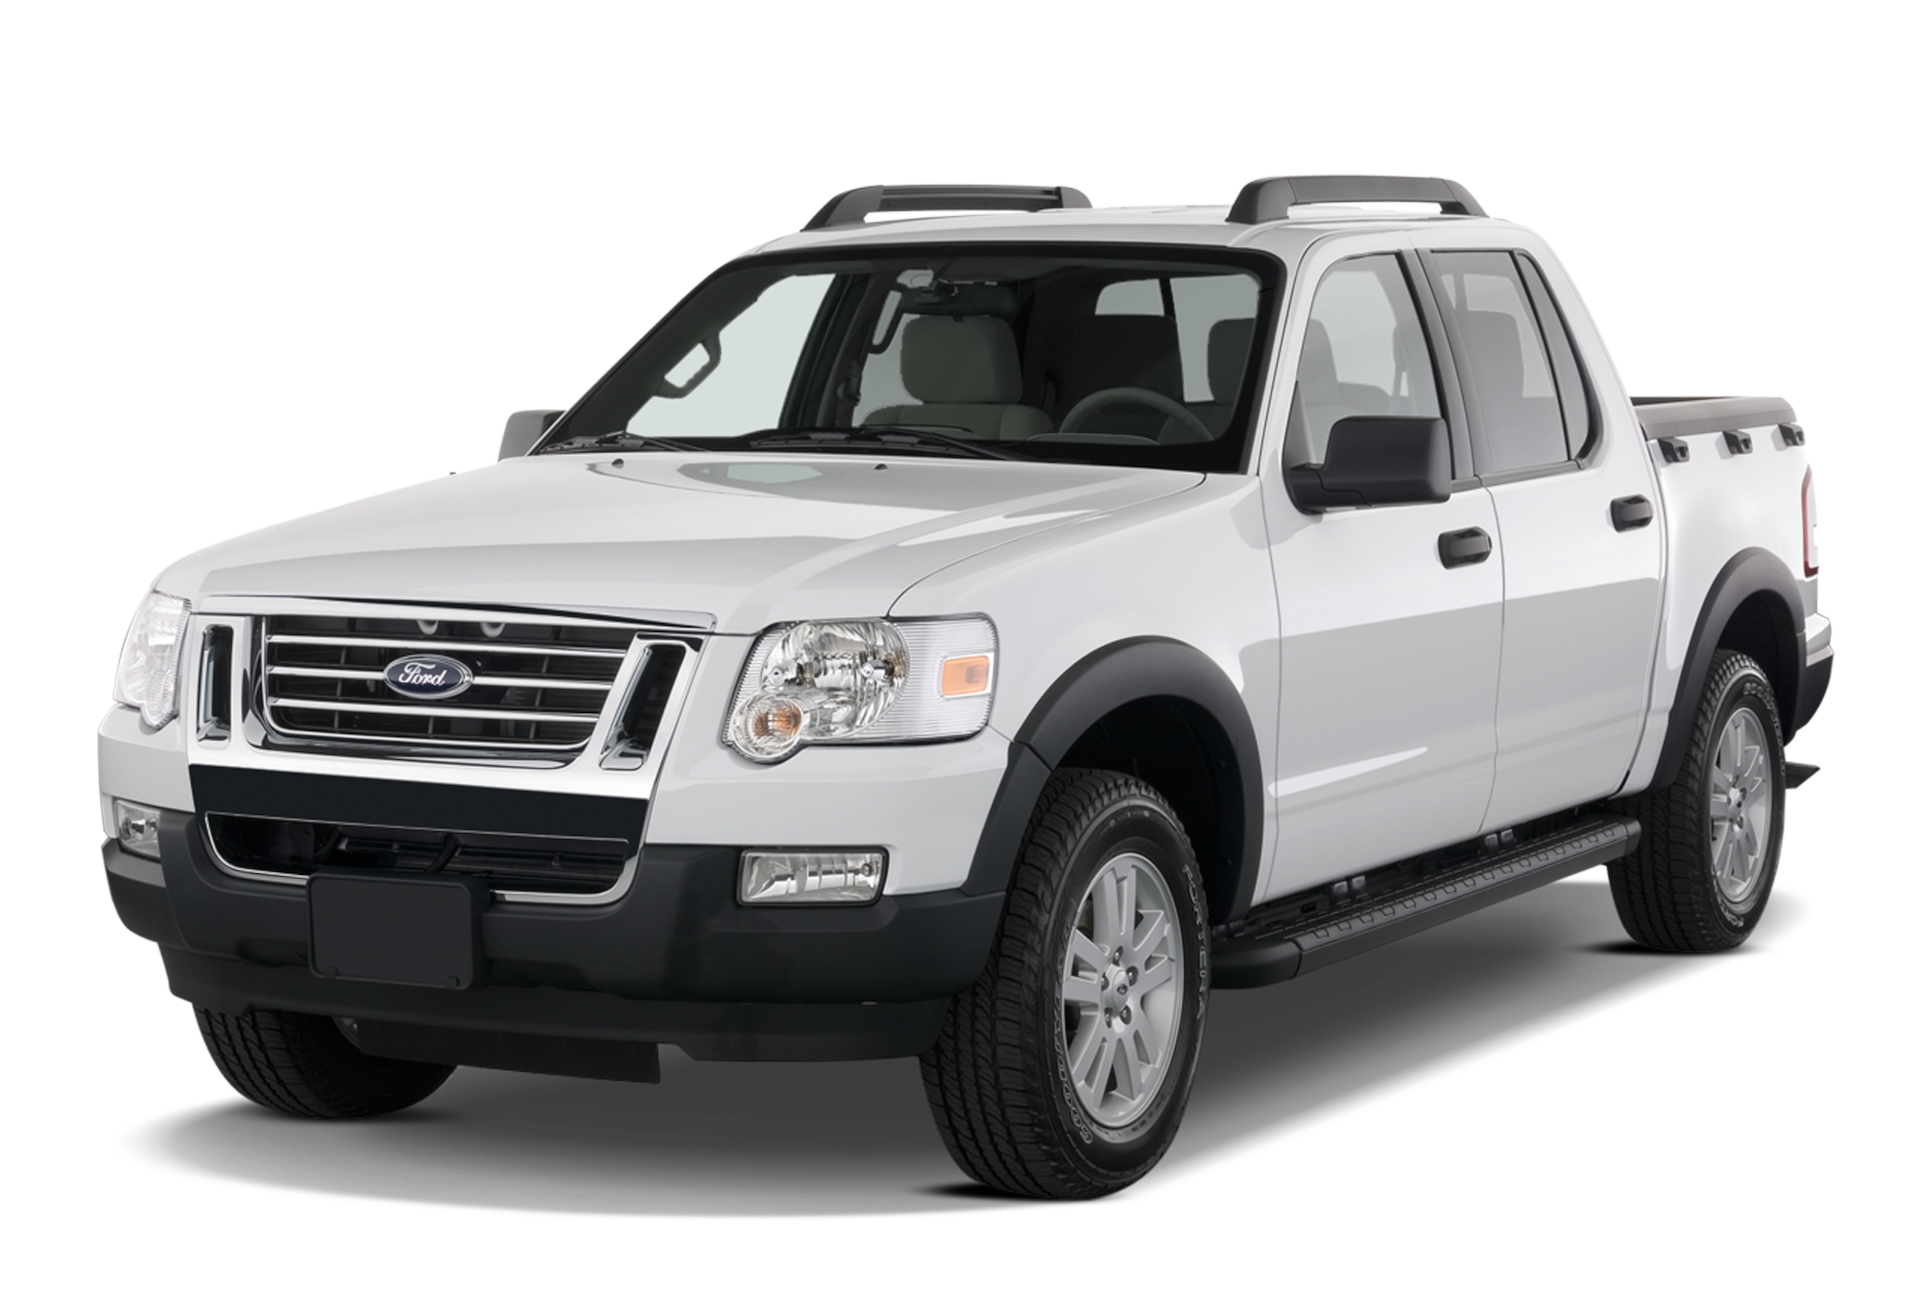 2010 Ford Explorer Sport Trac Prices, Reviews, and Photos - MotorTrend